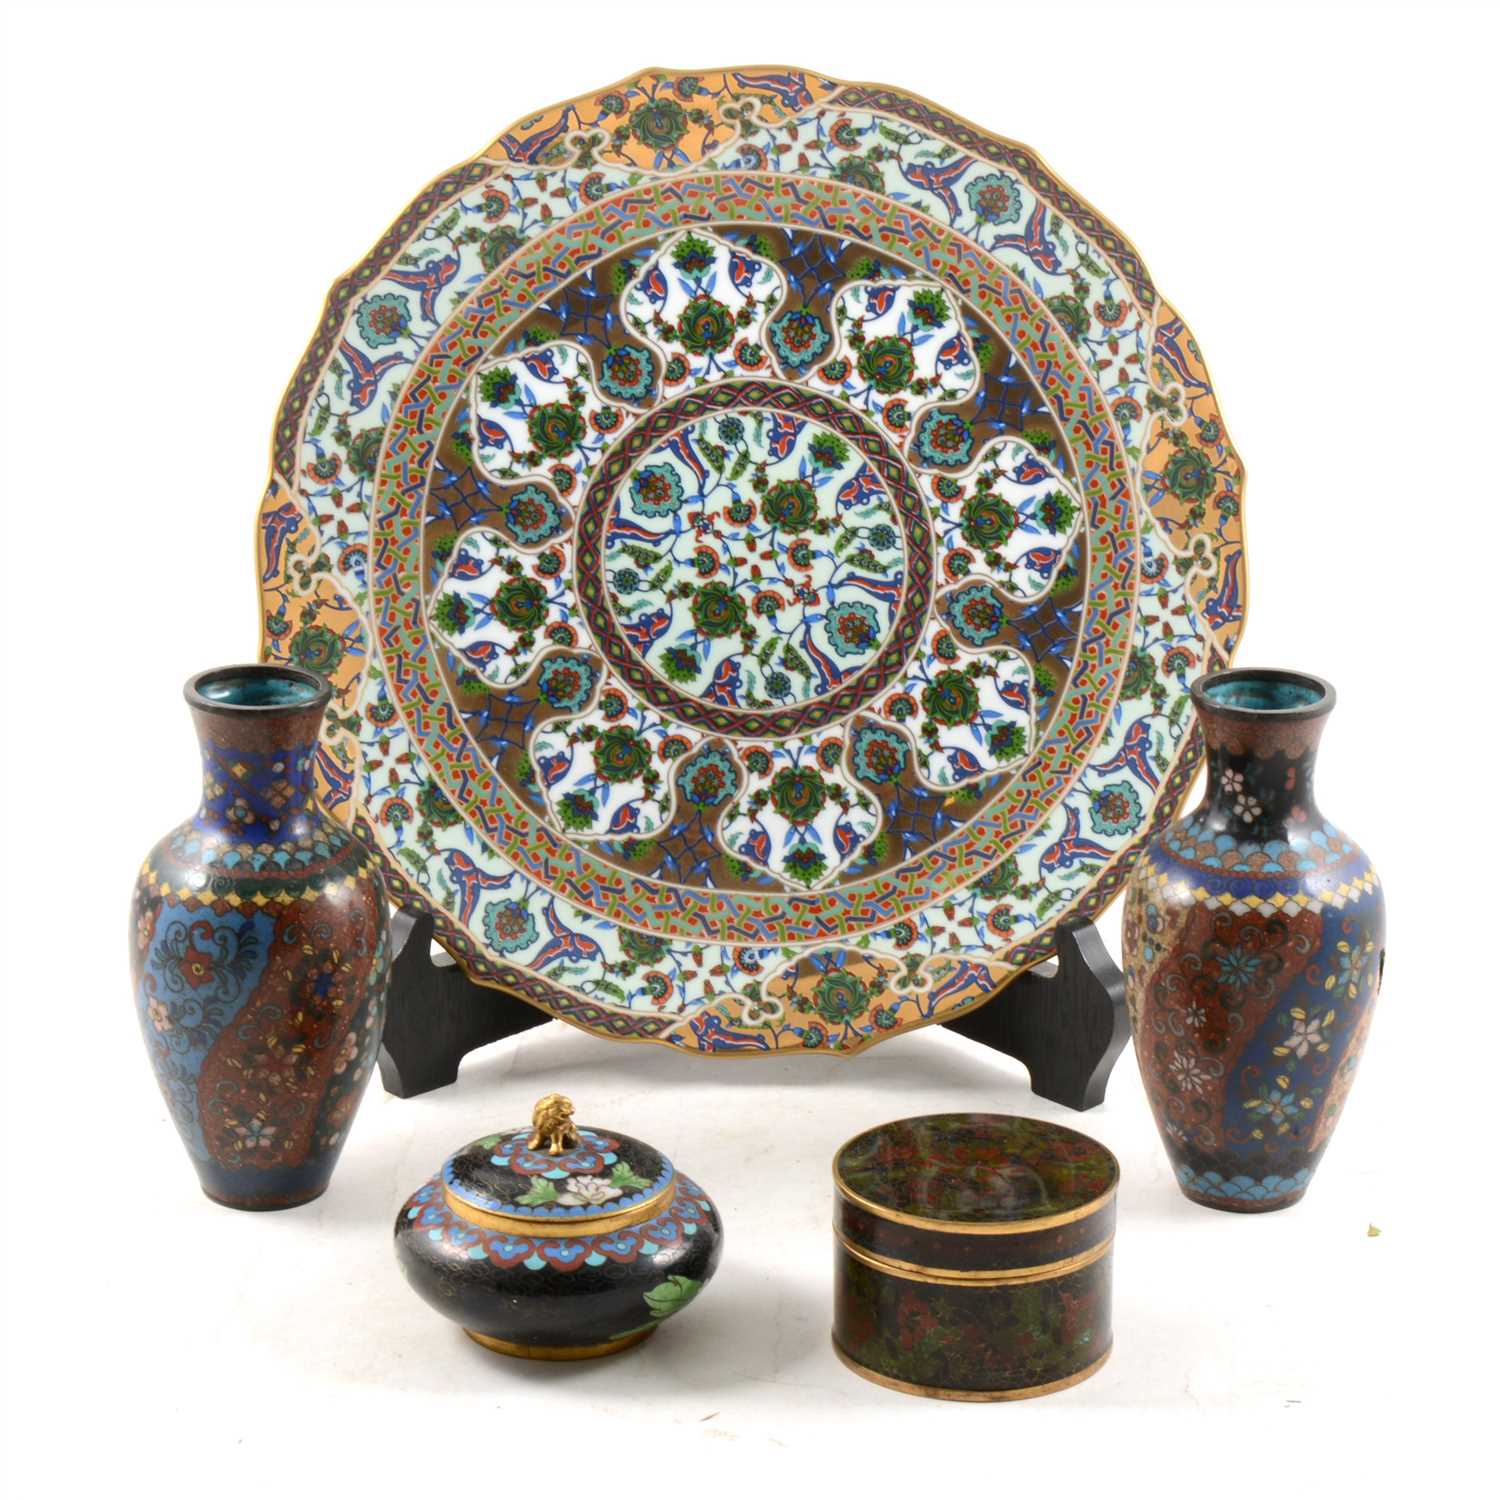 Lot 16 - A pair of cloisonné vases, two cloisonné boxes and covers, and a plate.